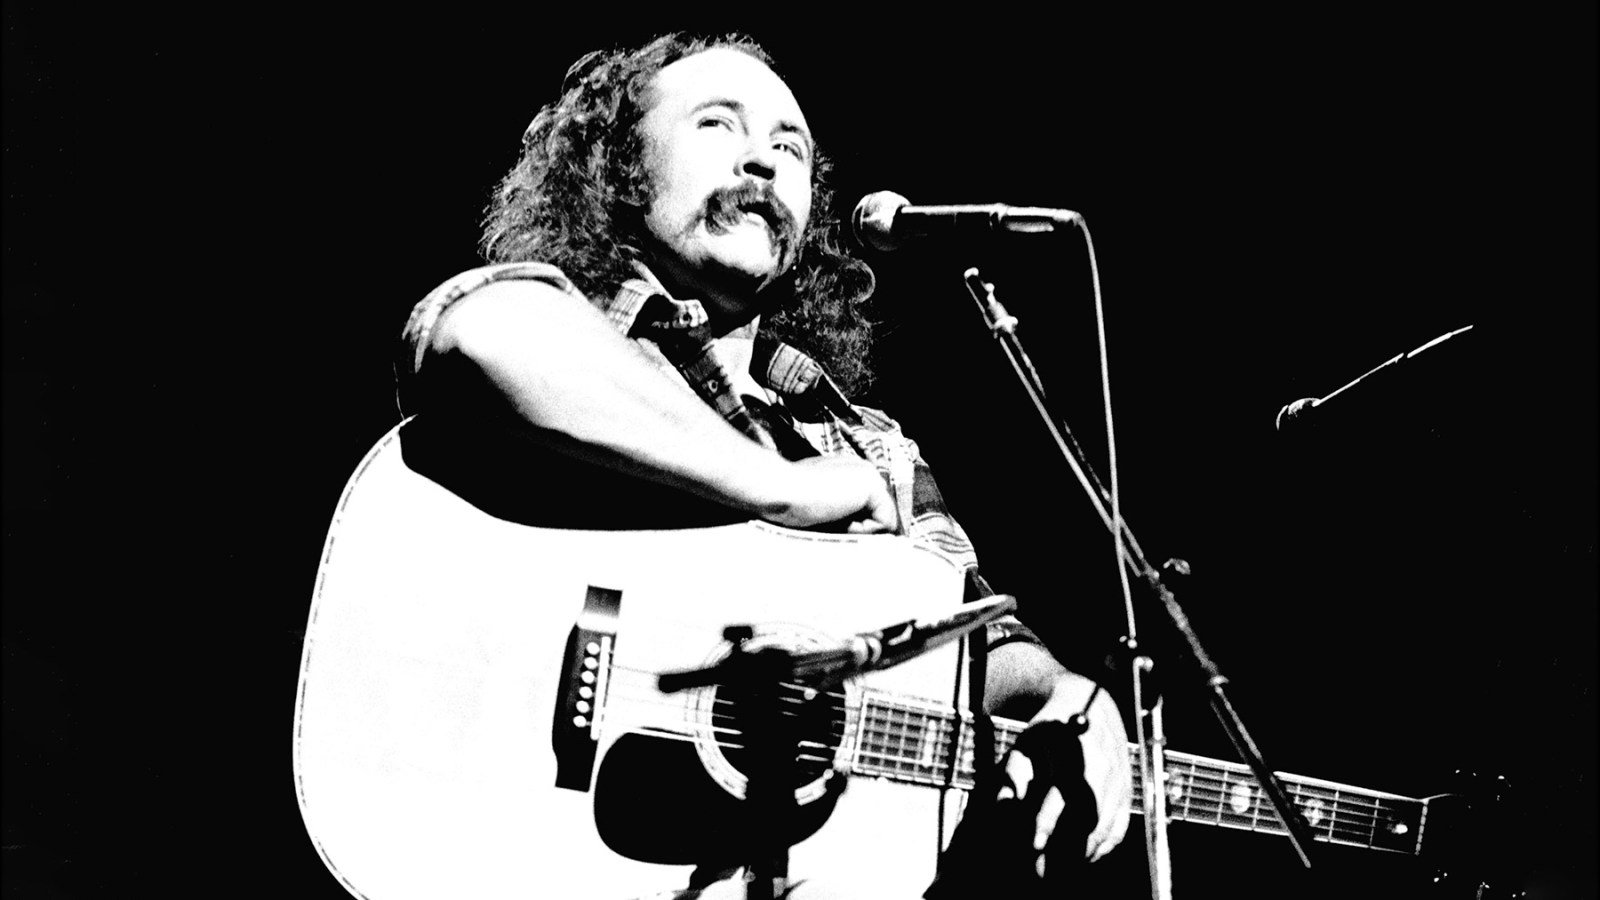 'I Count Myself Hugely Lucky': David Crosby Looks Back in Unheard Interview Audio